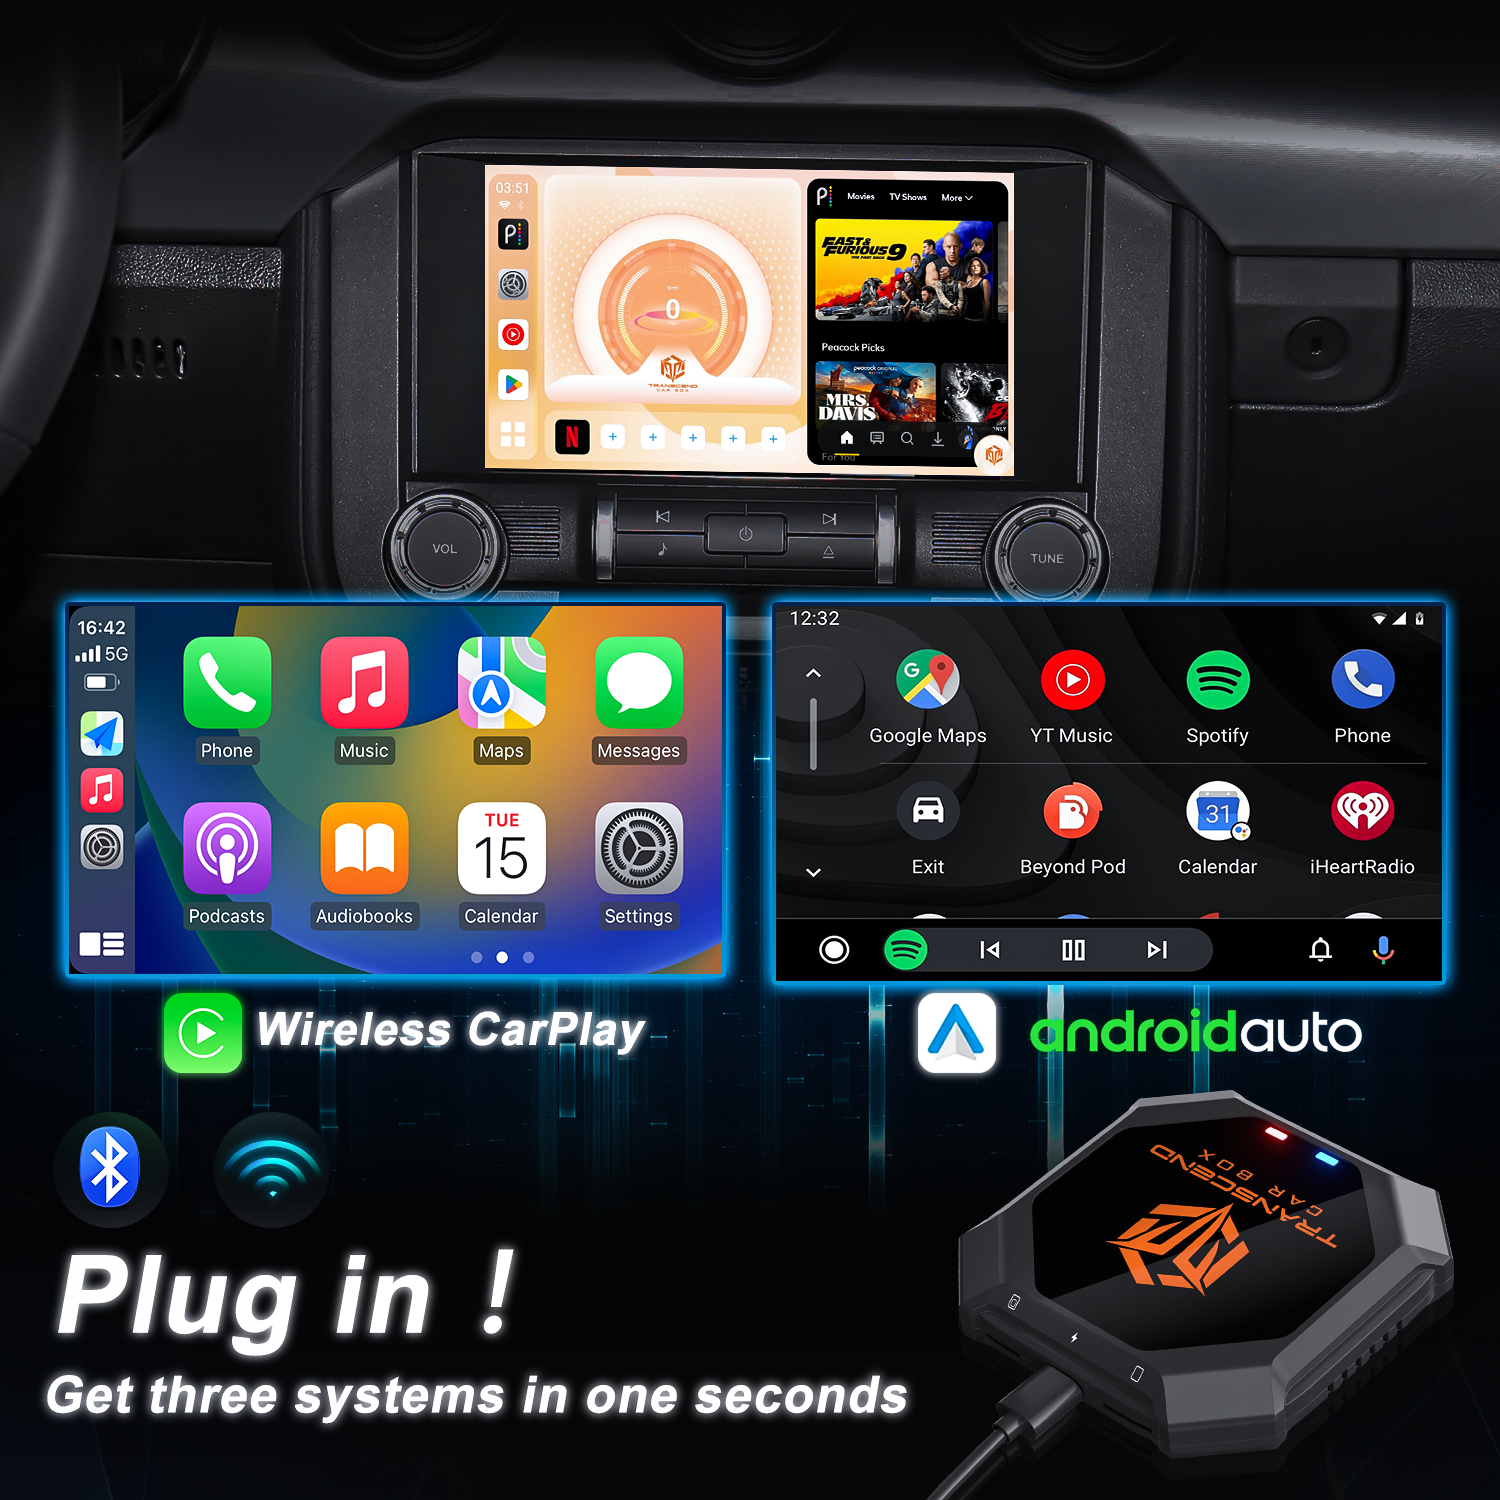 Active wireless CarPlay on your car 